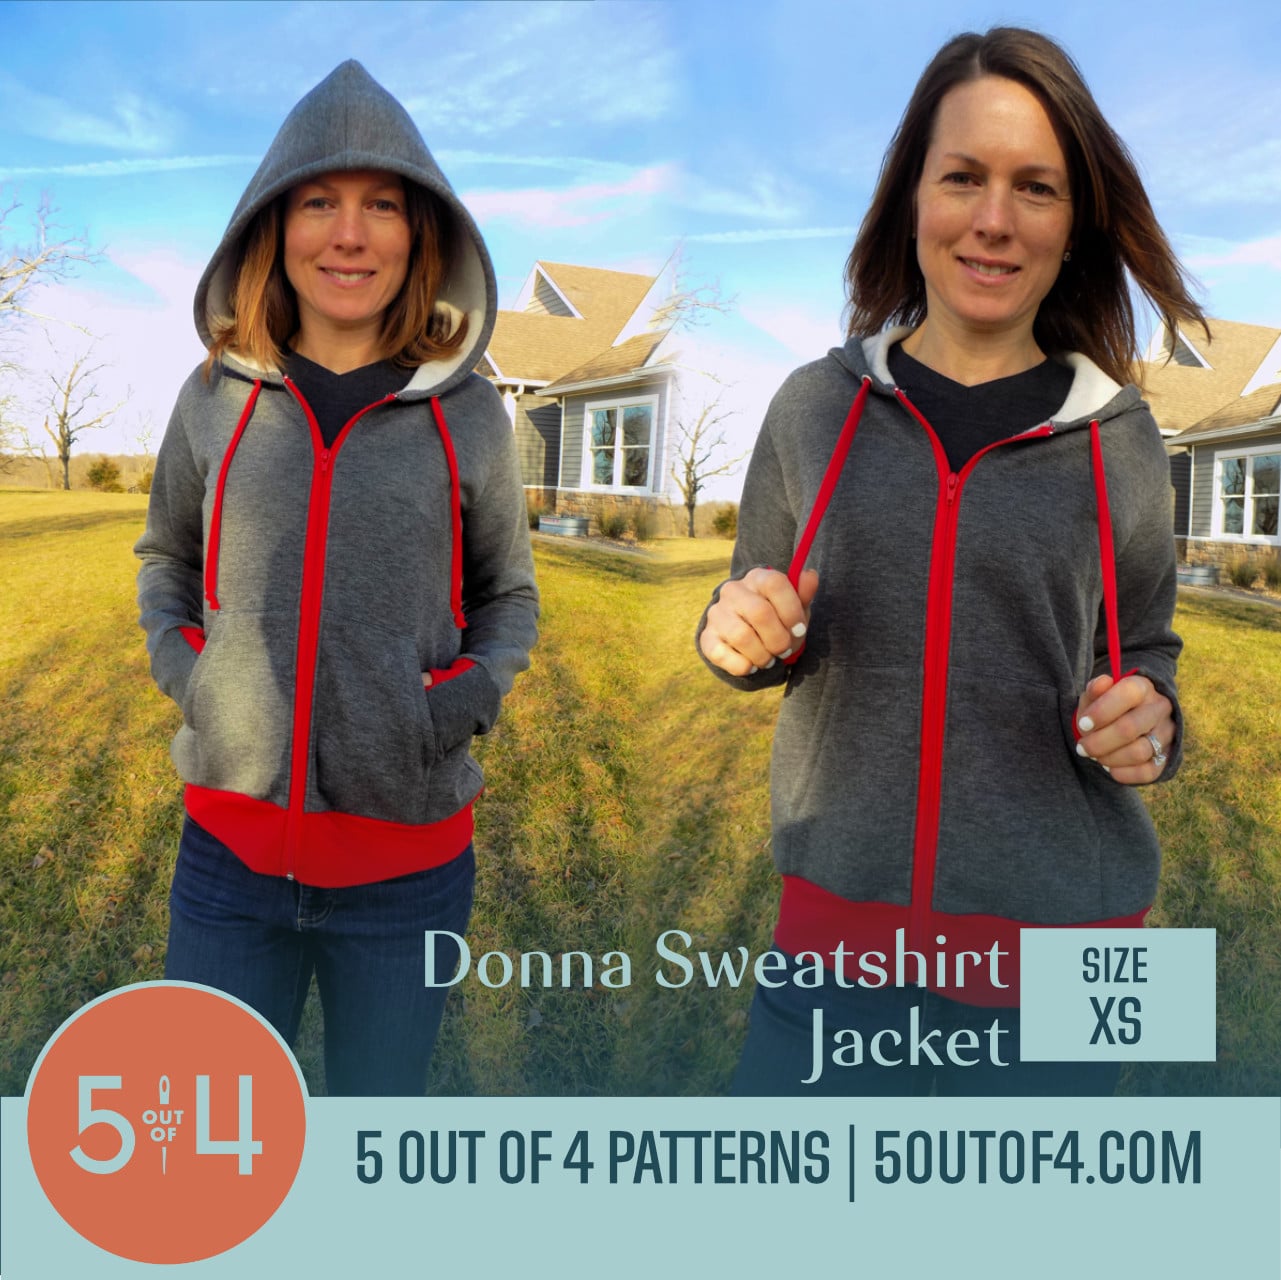 Donna Sweatshirt Jacket - 5 out of 4 Patterns